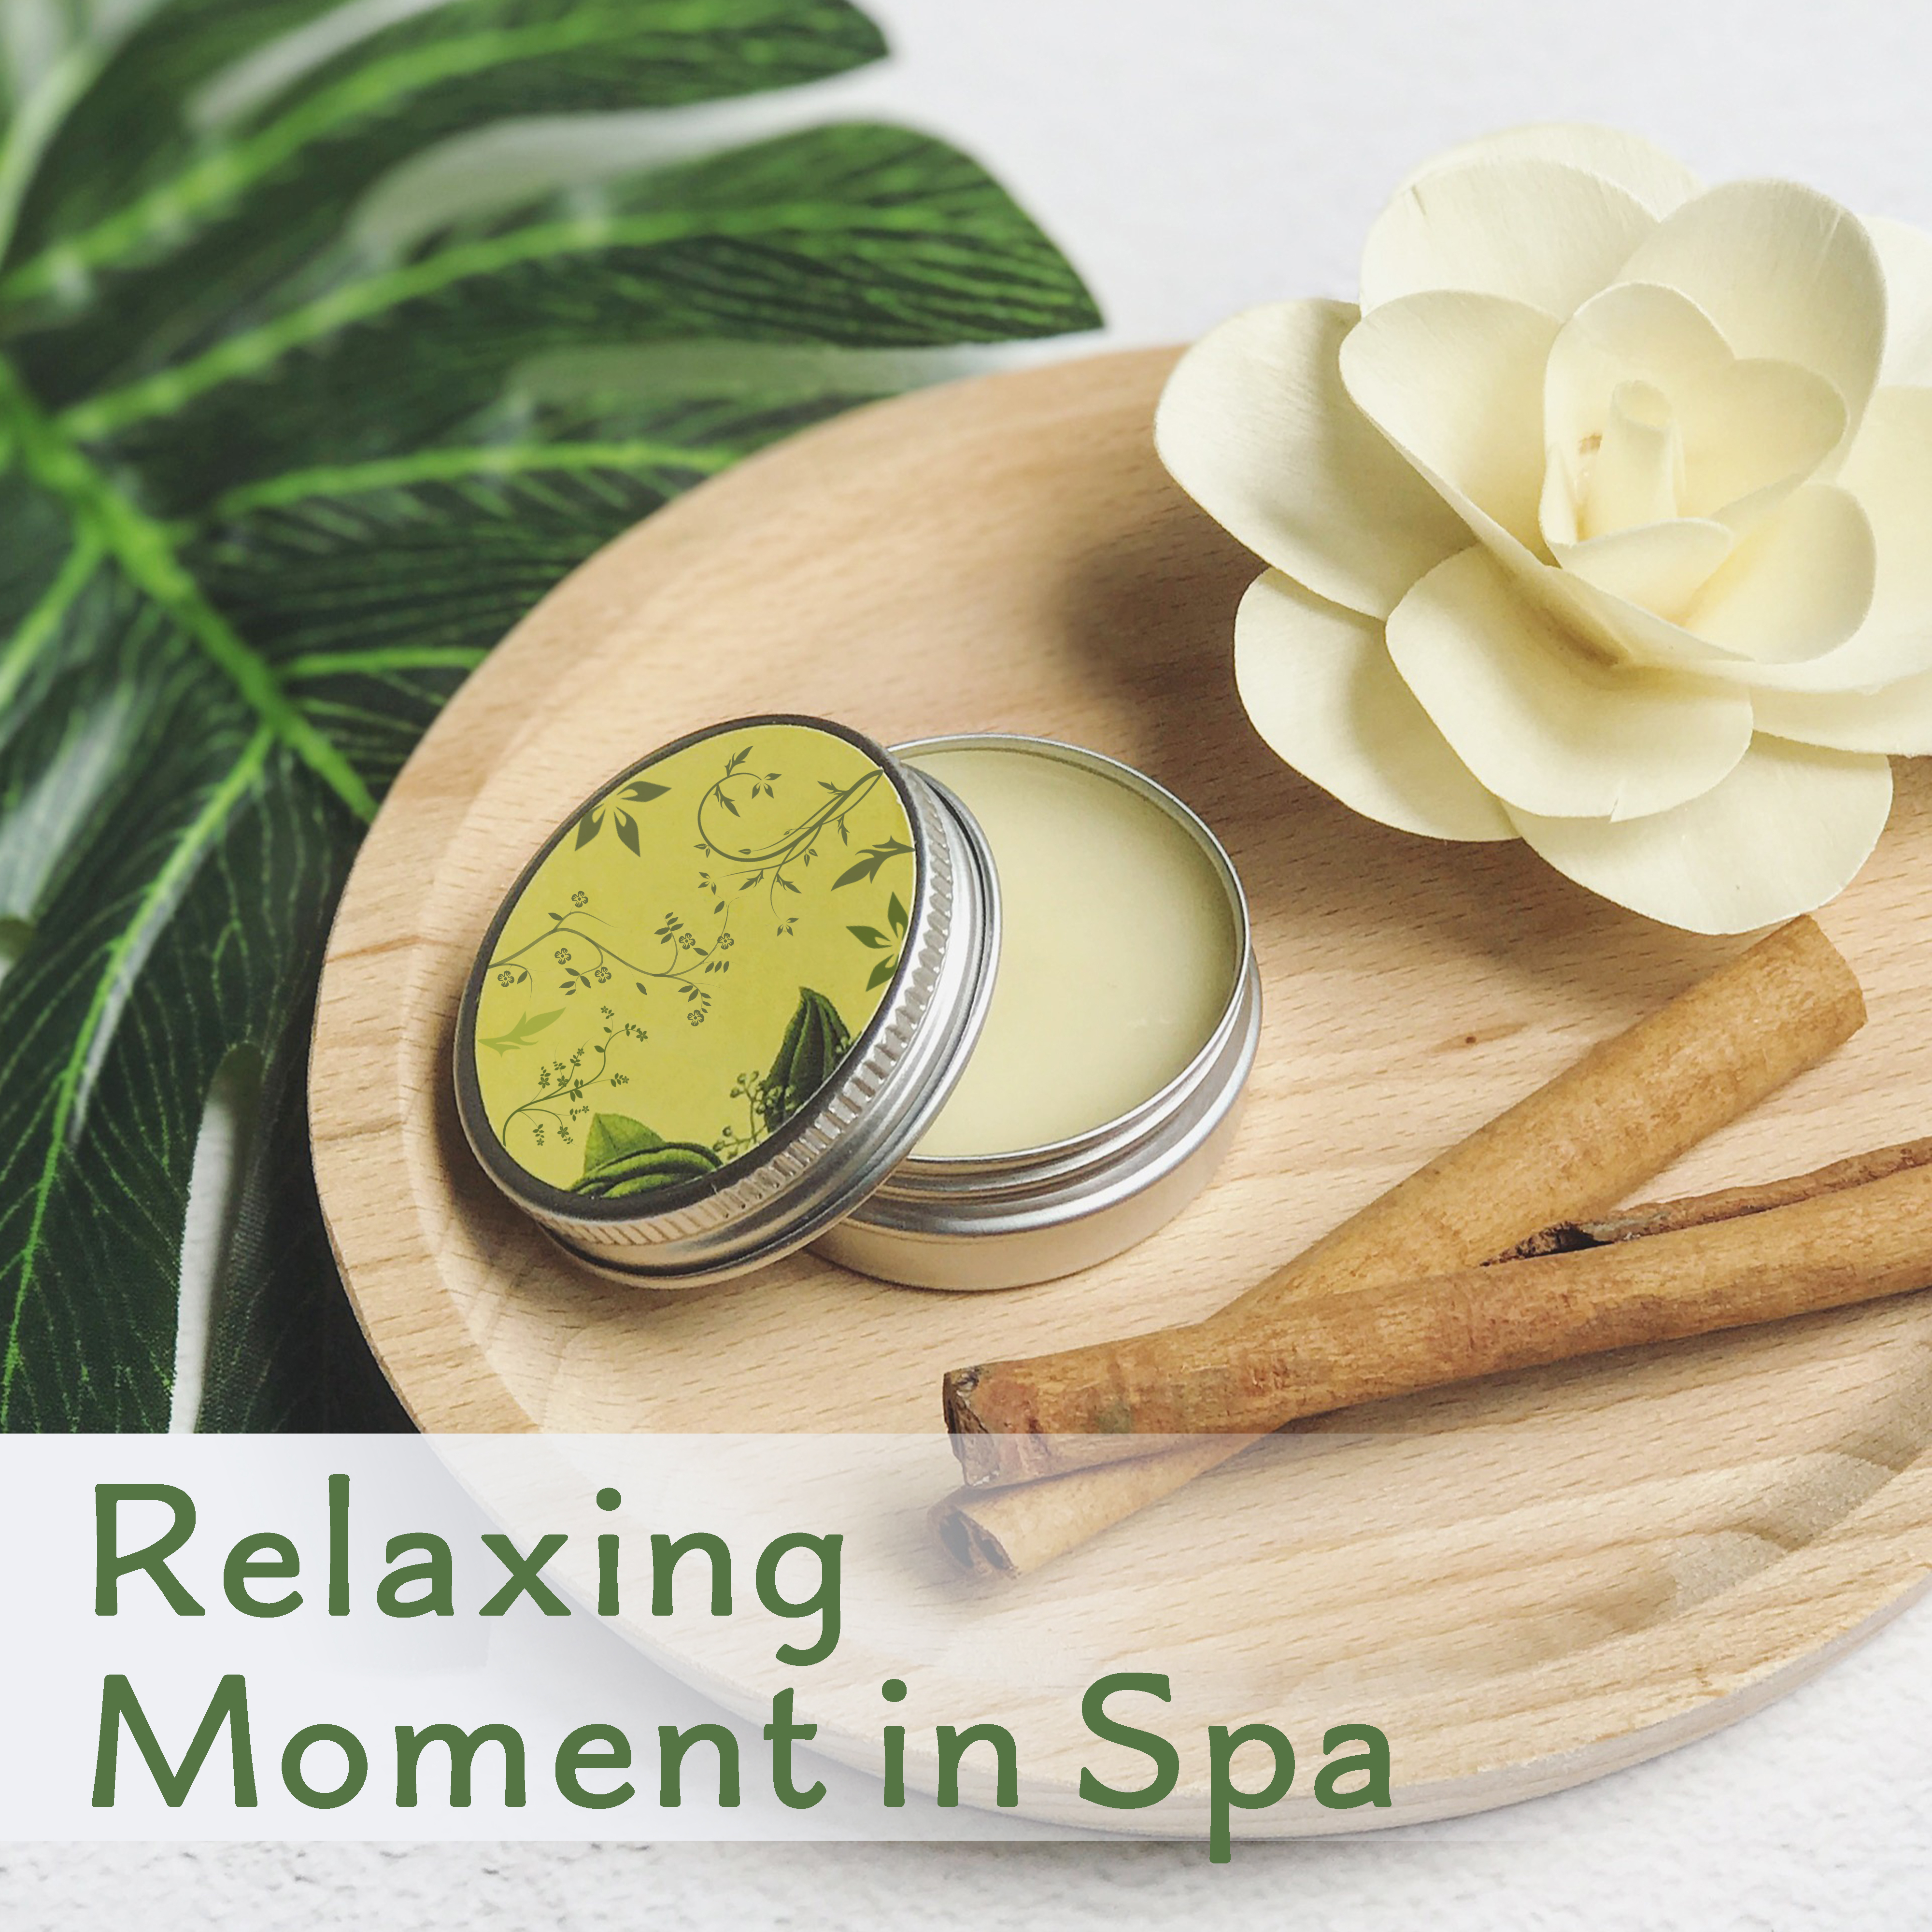 Relaxing Moment in Spa  Deep Relief, Inner Healing, Massage Therapy, Pure Sleep, New Age to Calm Down